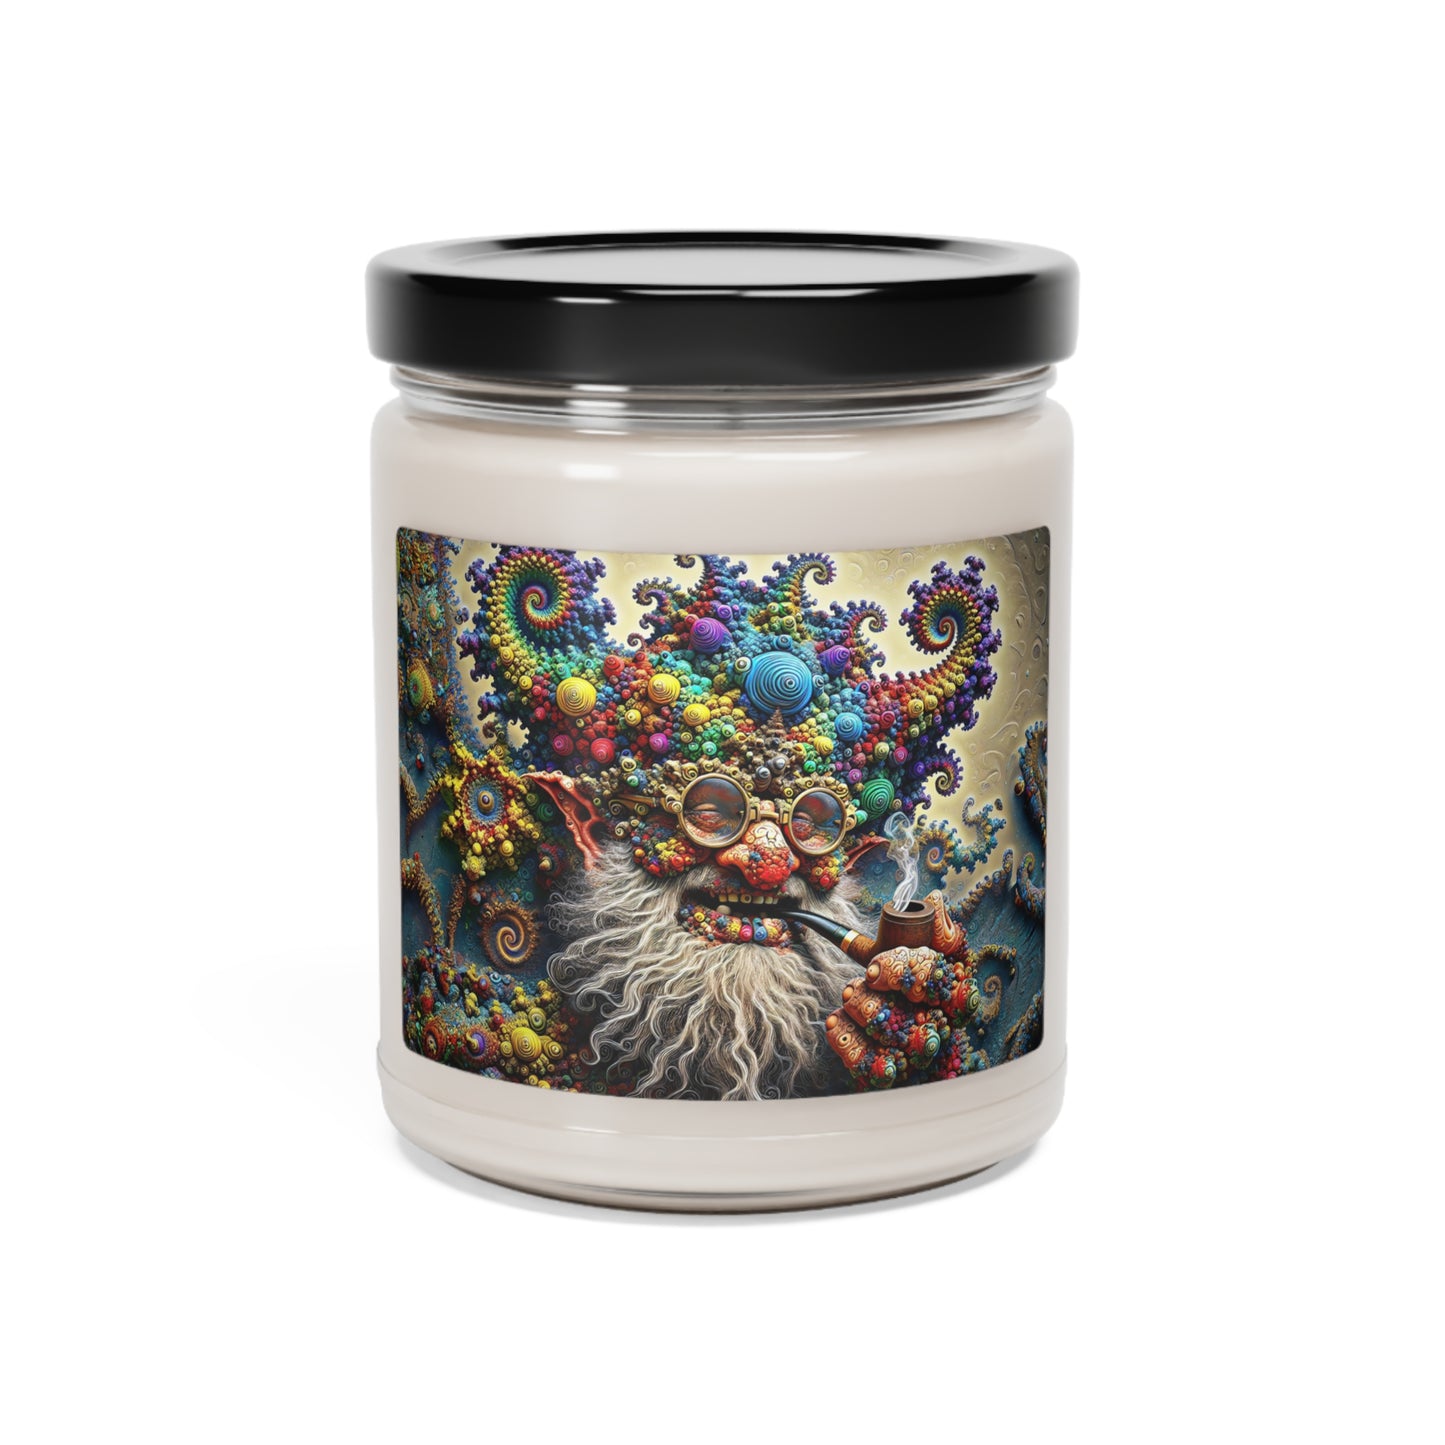 Chromatic Whimsy Troll Scented Soy Candle, 9oz